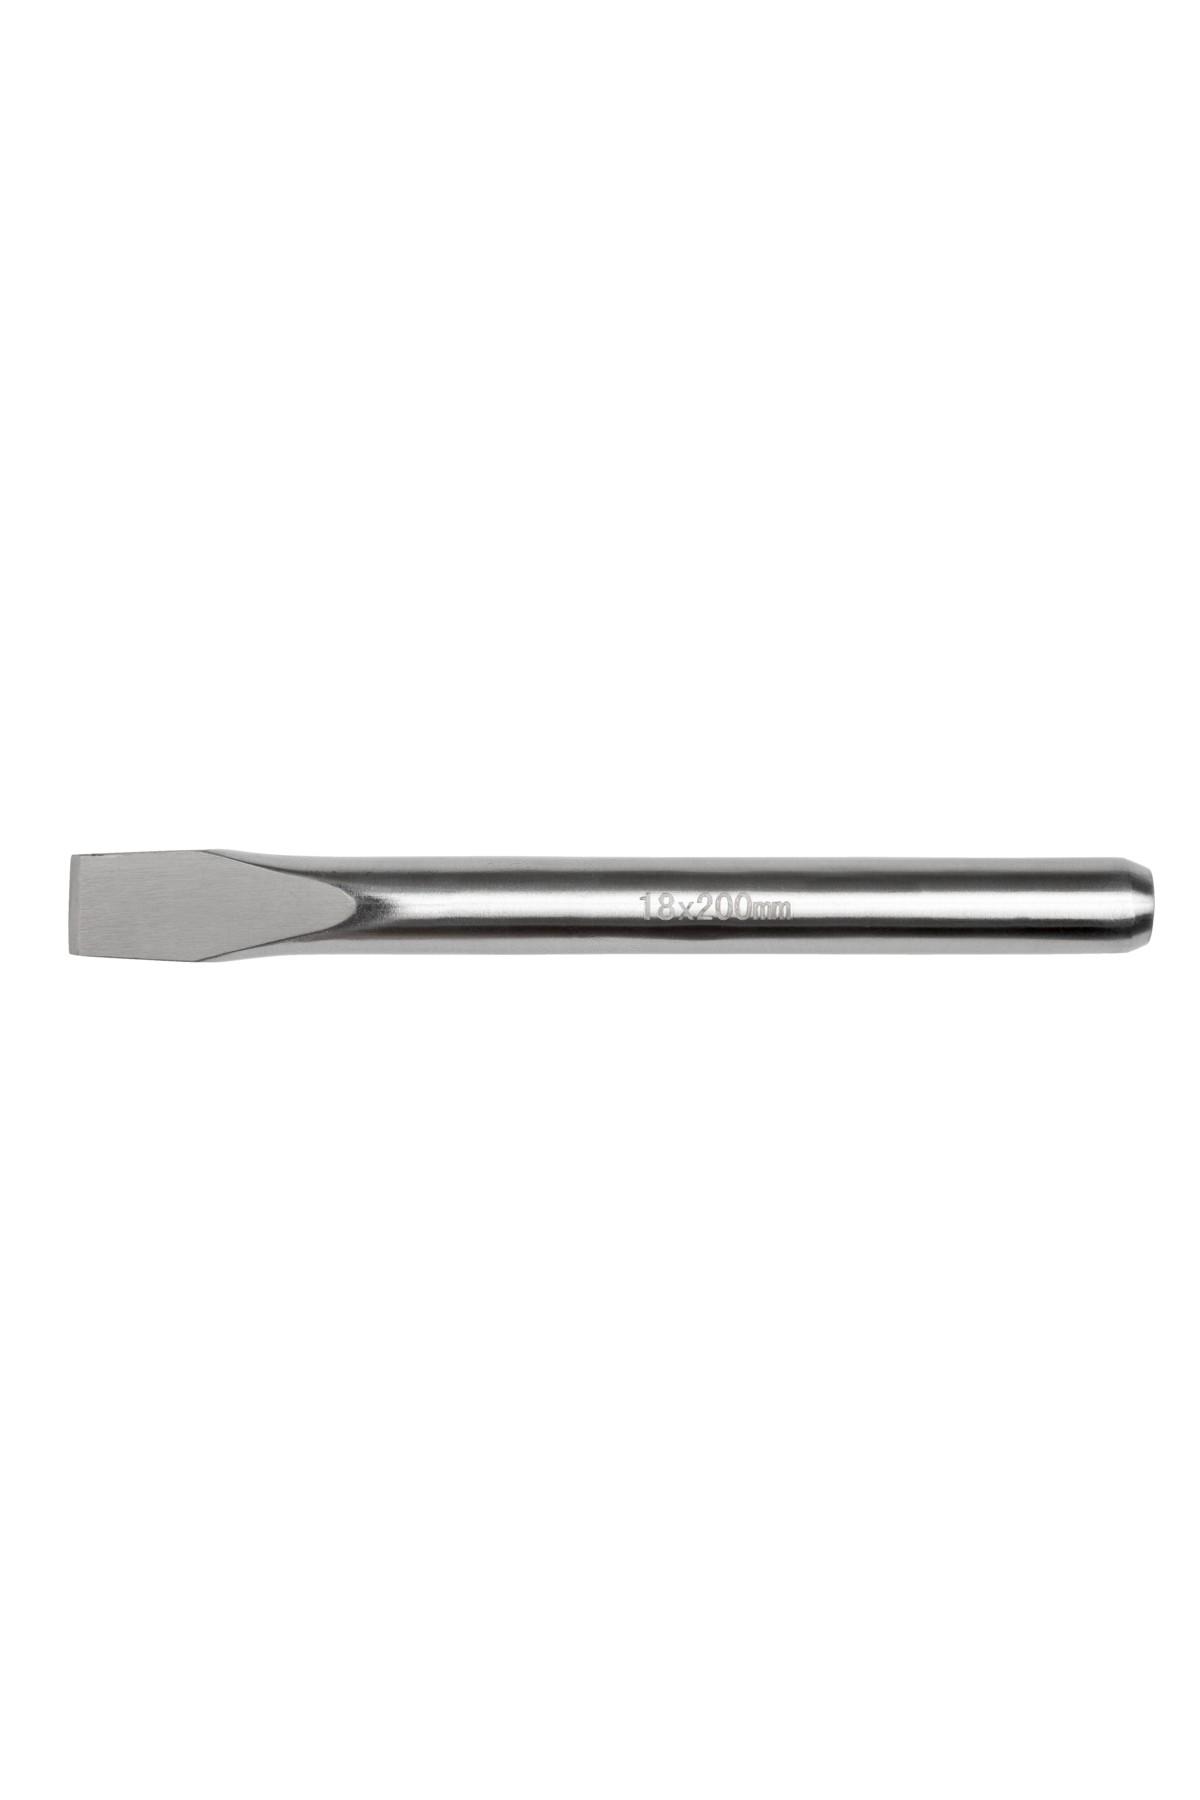 Flat chisel stainless 16-160mm